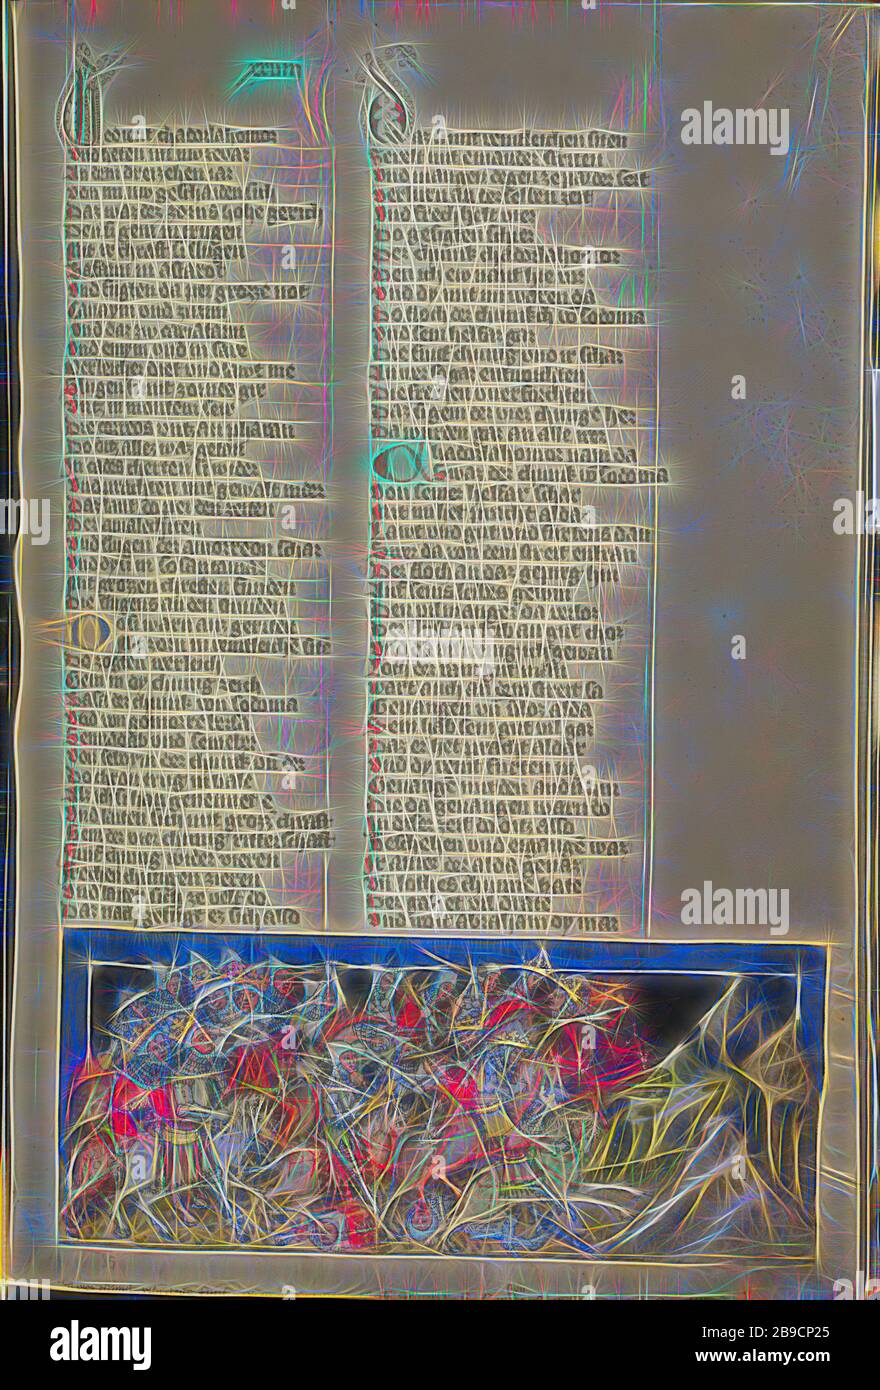 The Battle between the Four and Five Kings, Regensburg, Bavaria, Germany, about 1400 - 1410, Tempera colors, gold, silver paint, and ink on parchment, Leaf: 33.5 x 23.5 cm (13 3,16 x 9 1,4 in, Reimagined by Gibon, design of warm cheerful glowing of brightness and light rays radiance. Classic art reinvented with a modern twist. Photography inspired by futurism, embracing dynamic energy of modern technology, movement, speed and revolutionize culture. Stock Photo